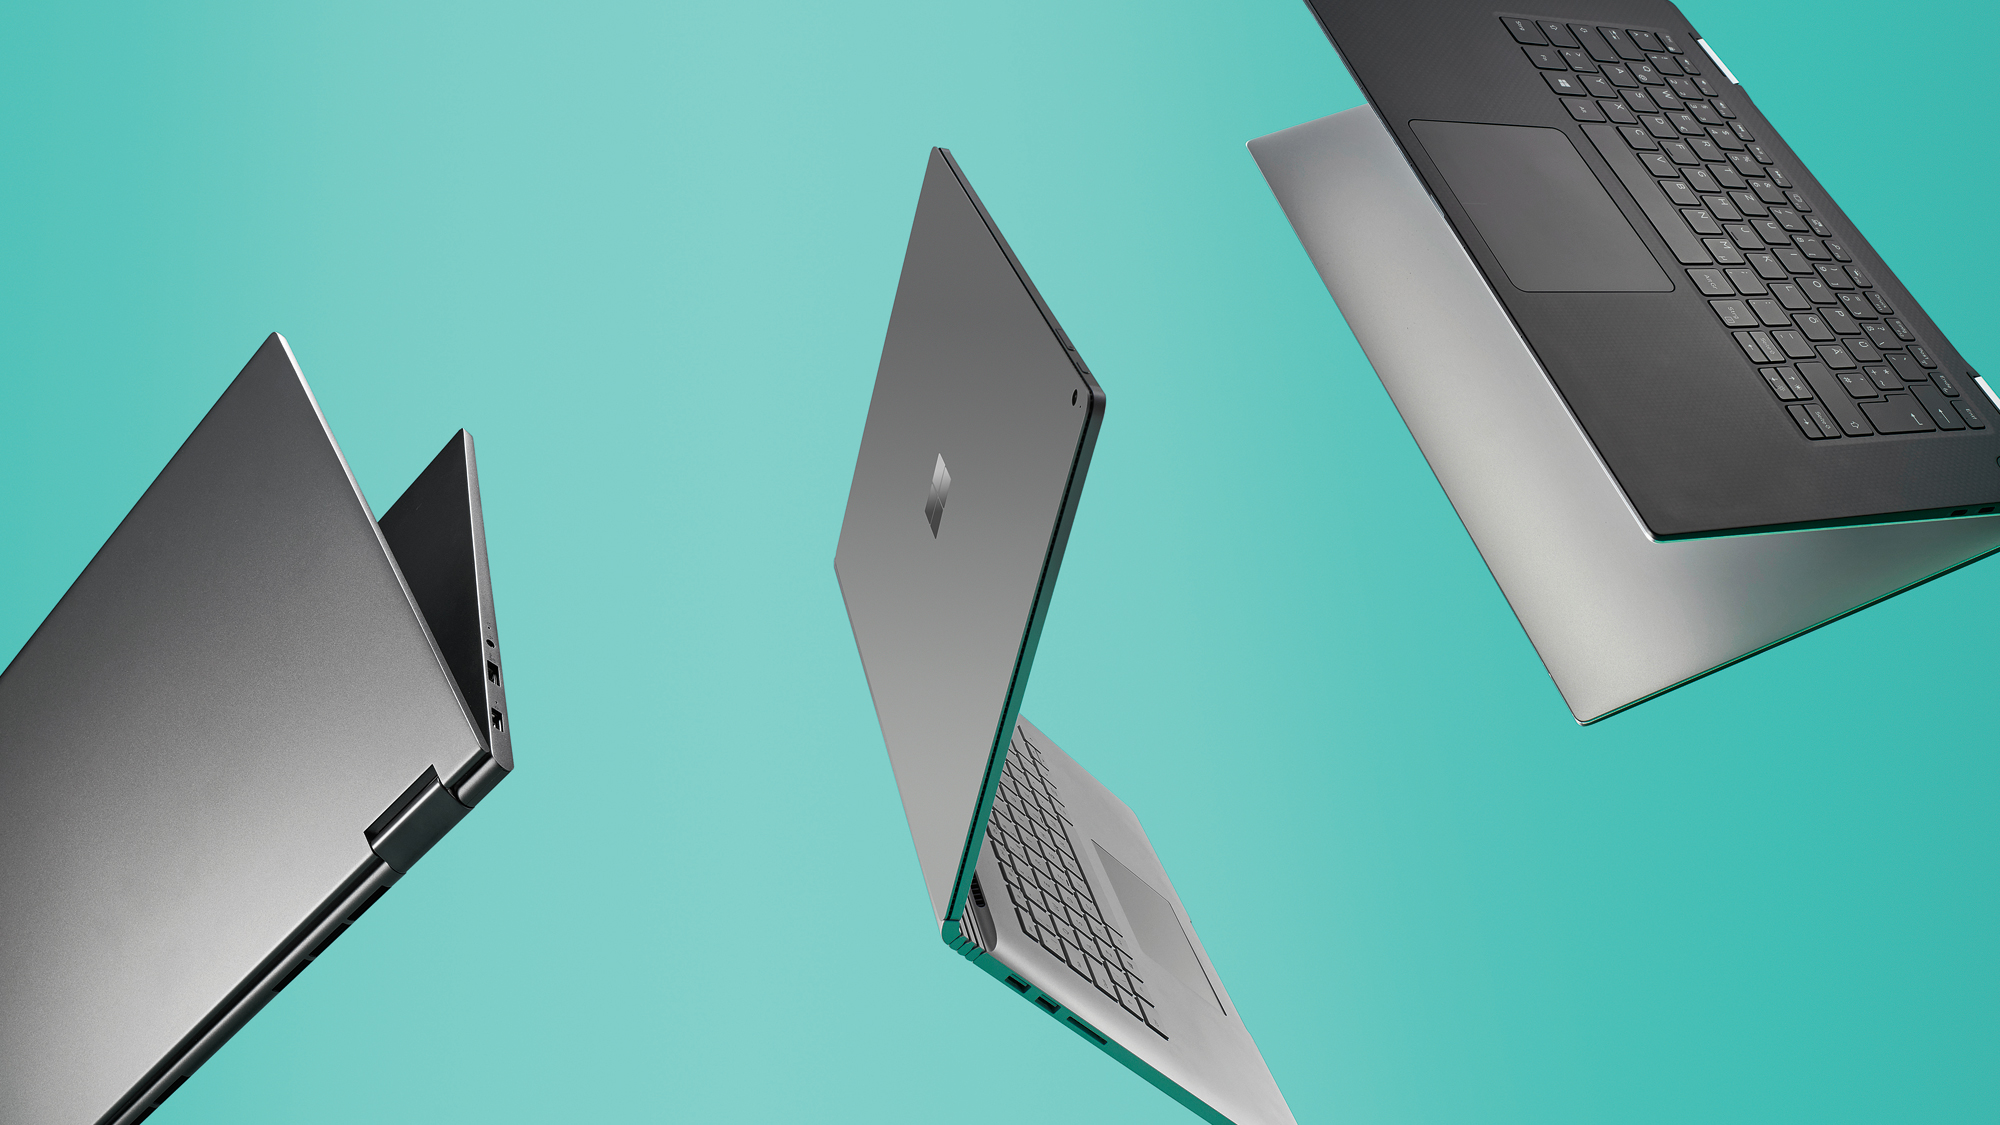 The Best Laptops Of 2020 In Singapore Our Picks Of The Top Laptops On Sale Now Techradar